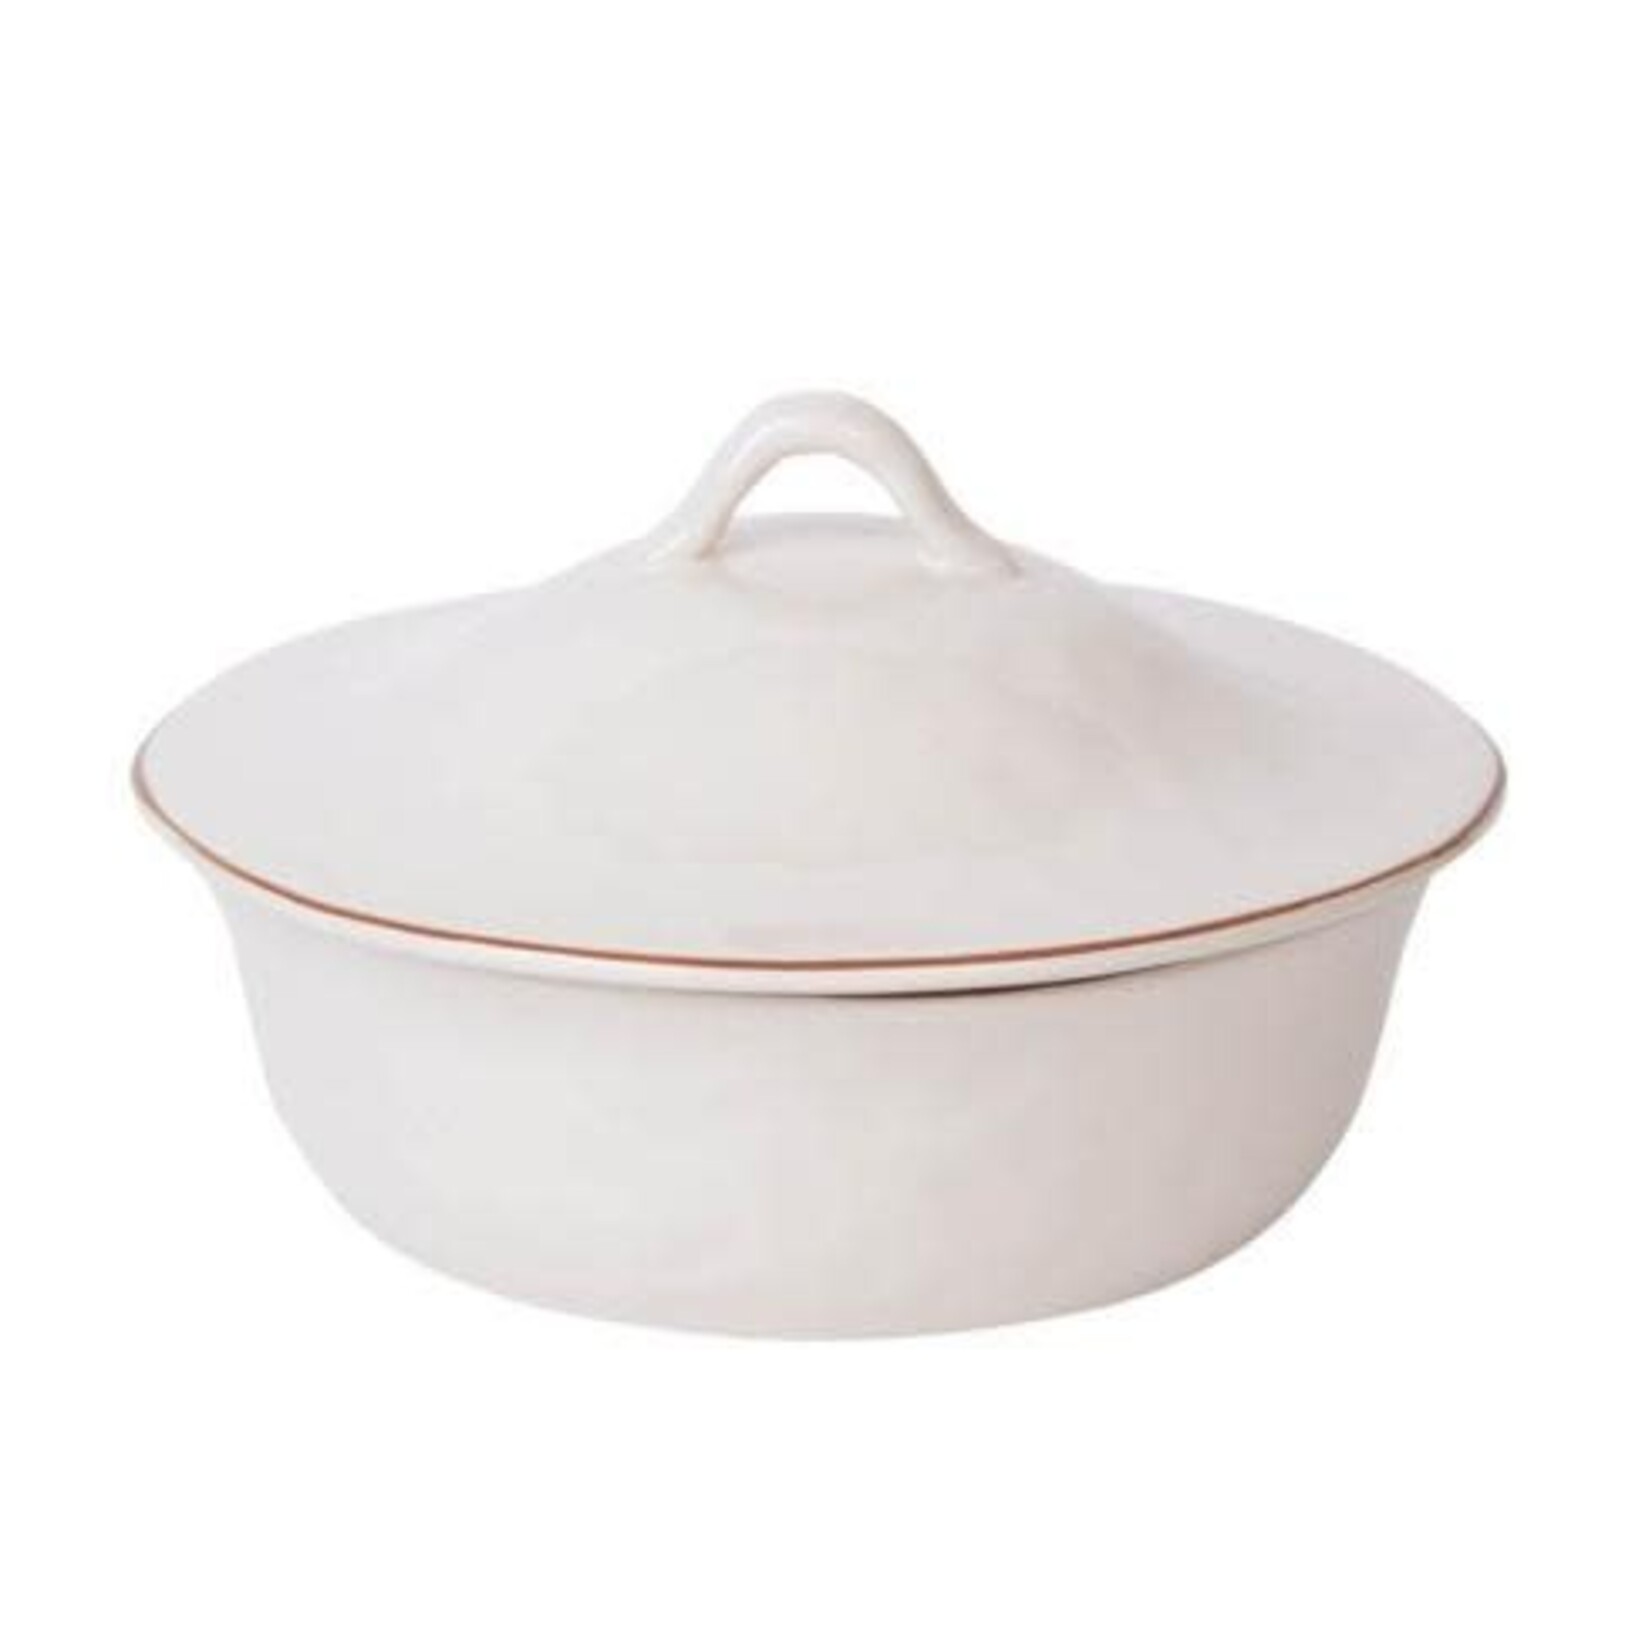 Skyros CANTARIA ROUND COVERED CASSEROLE - WHITE